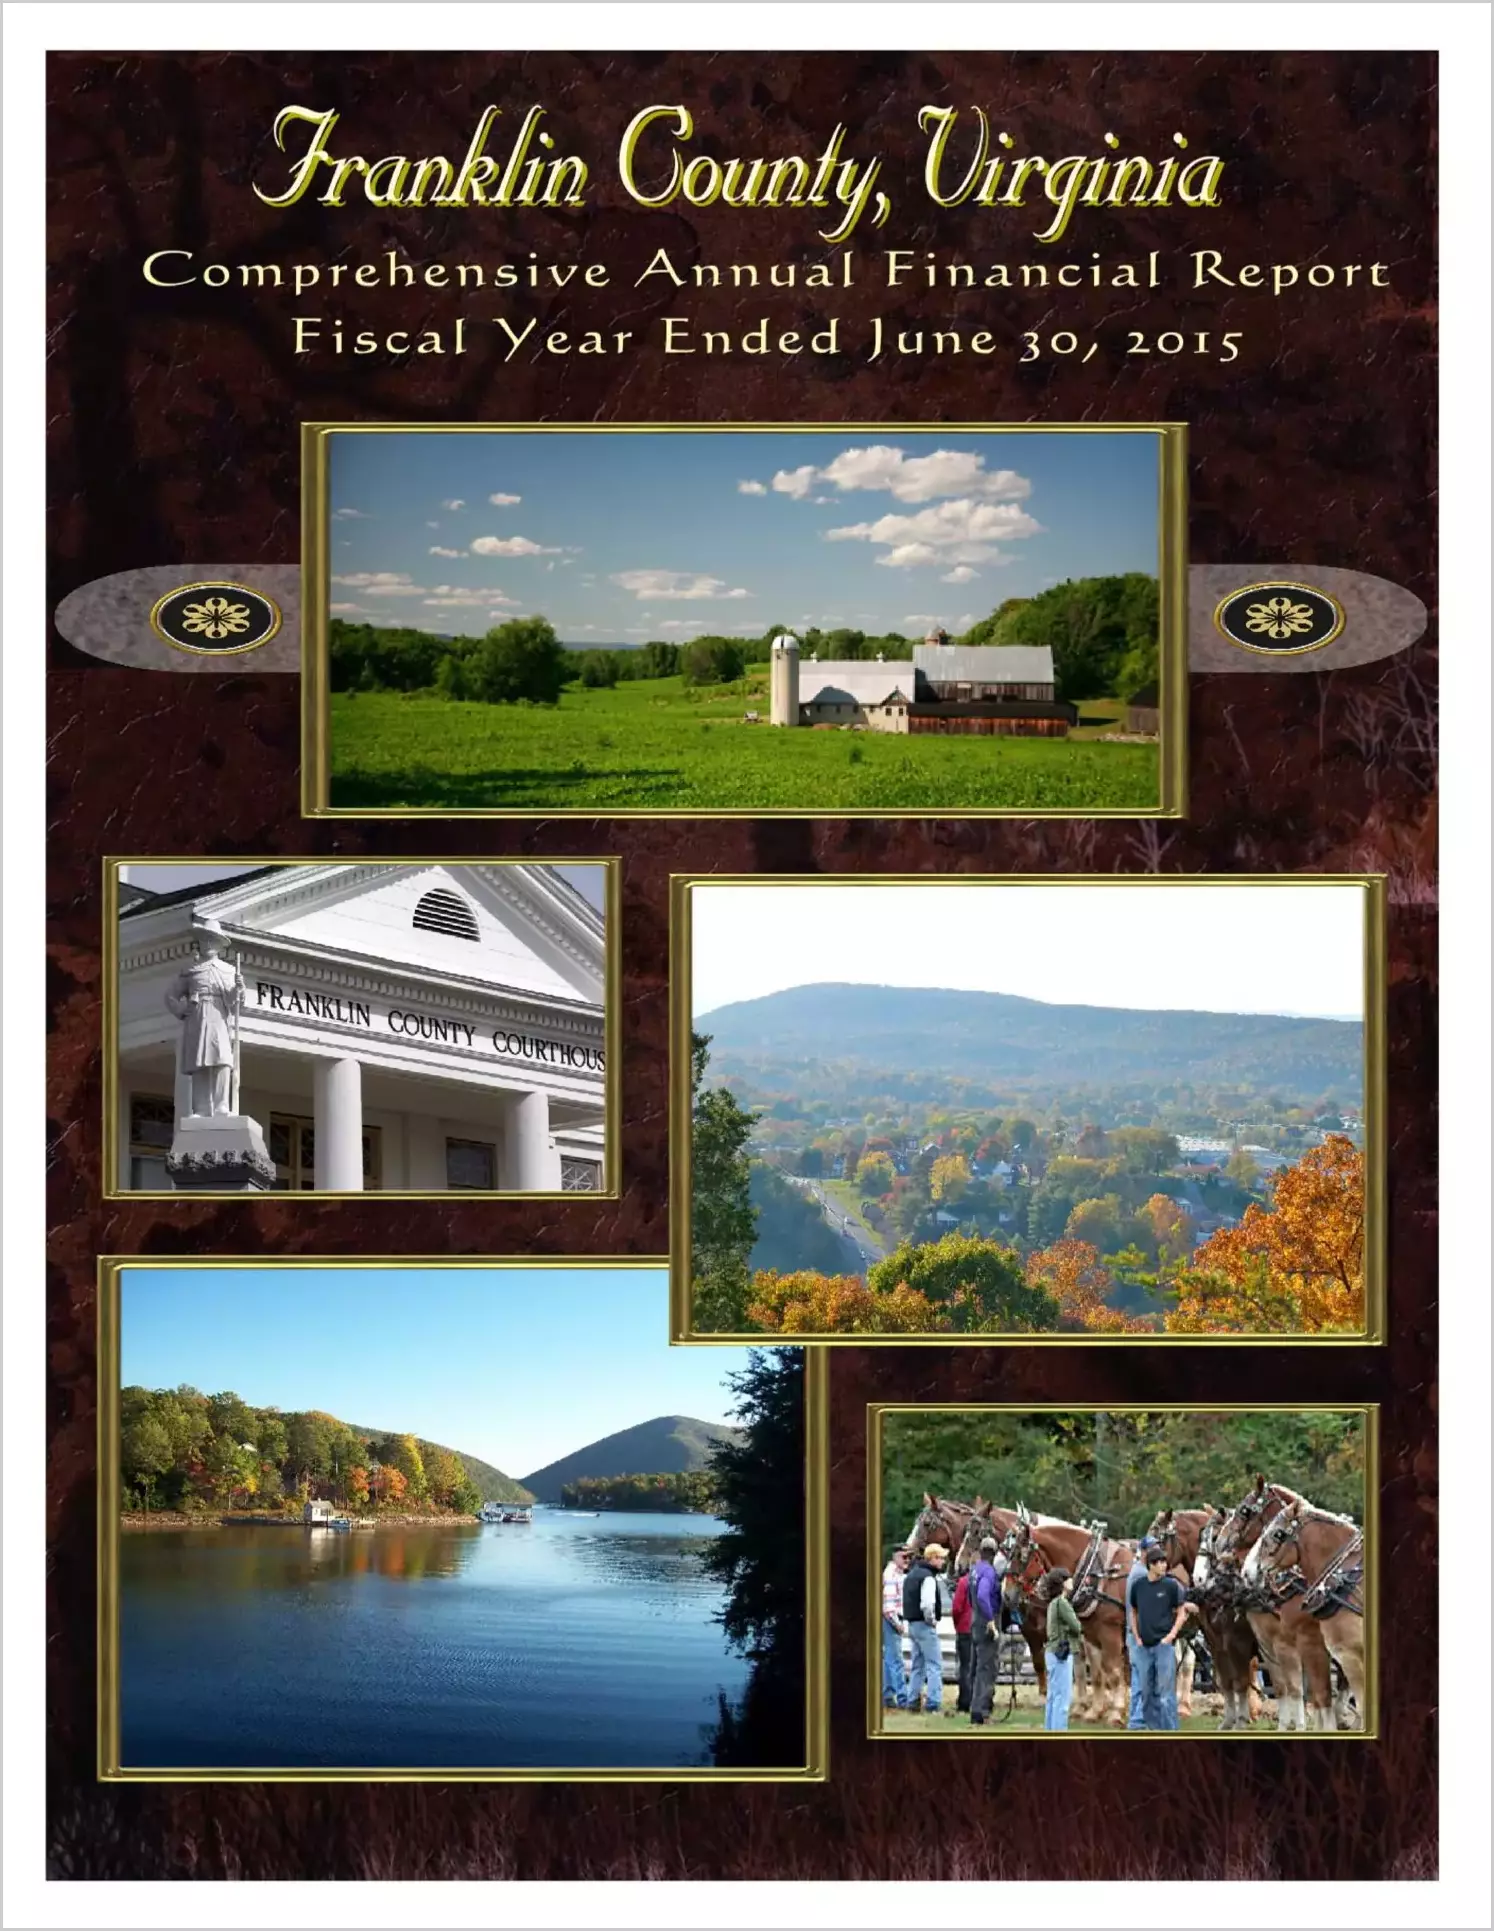 2015 Annual Financial Report for County of Franklin